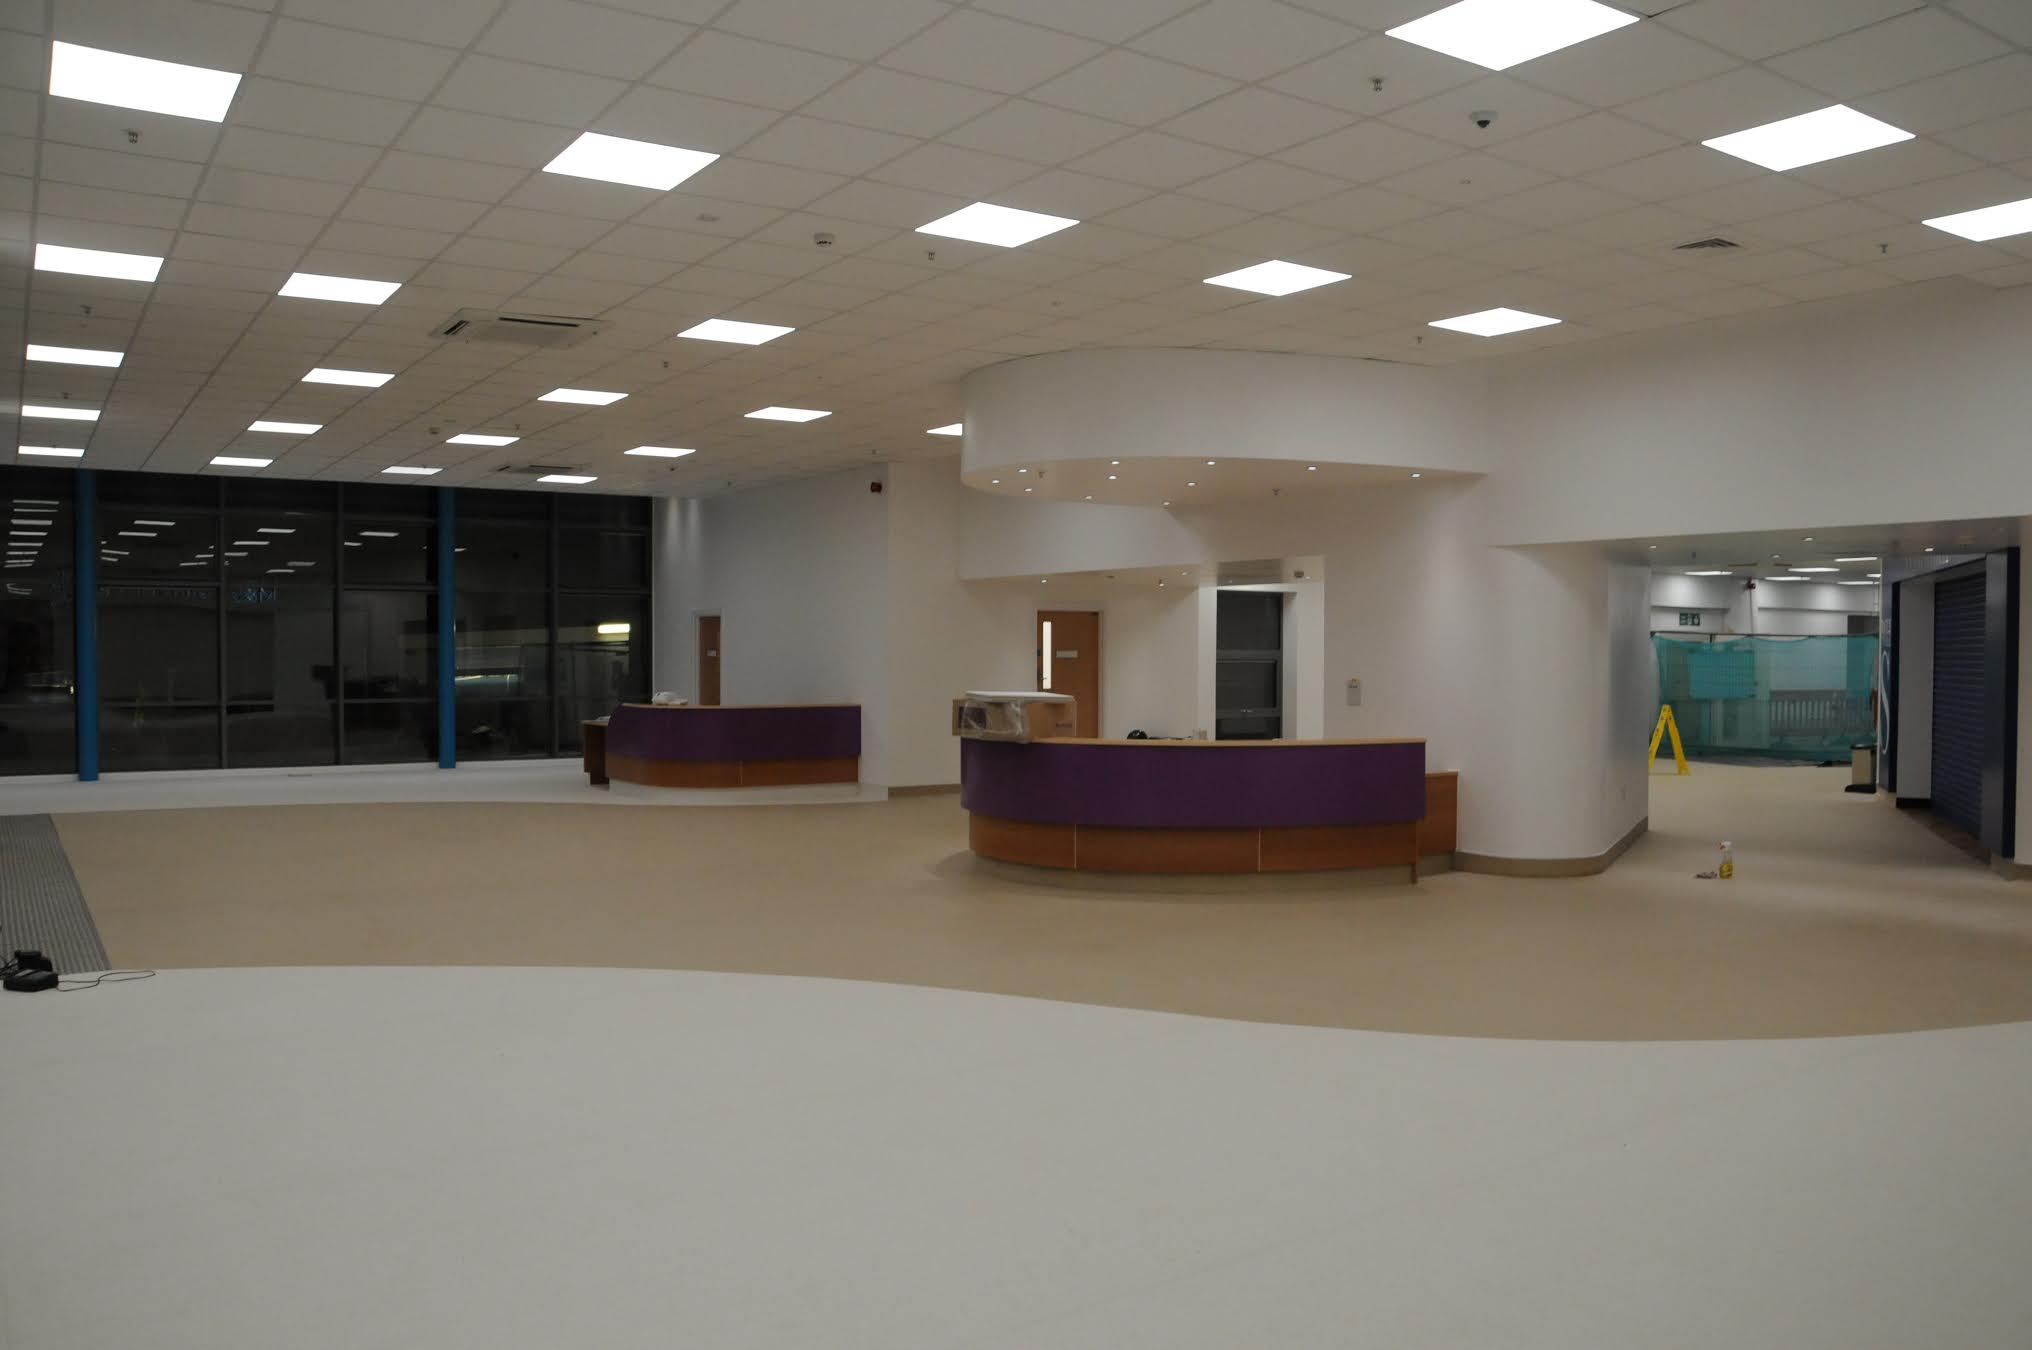 John Radcliffe Welcome Centre completes ahead of time